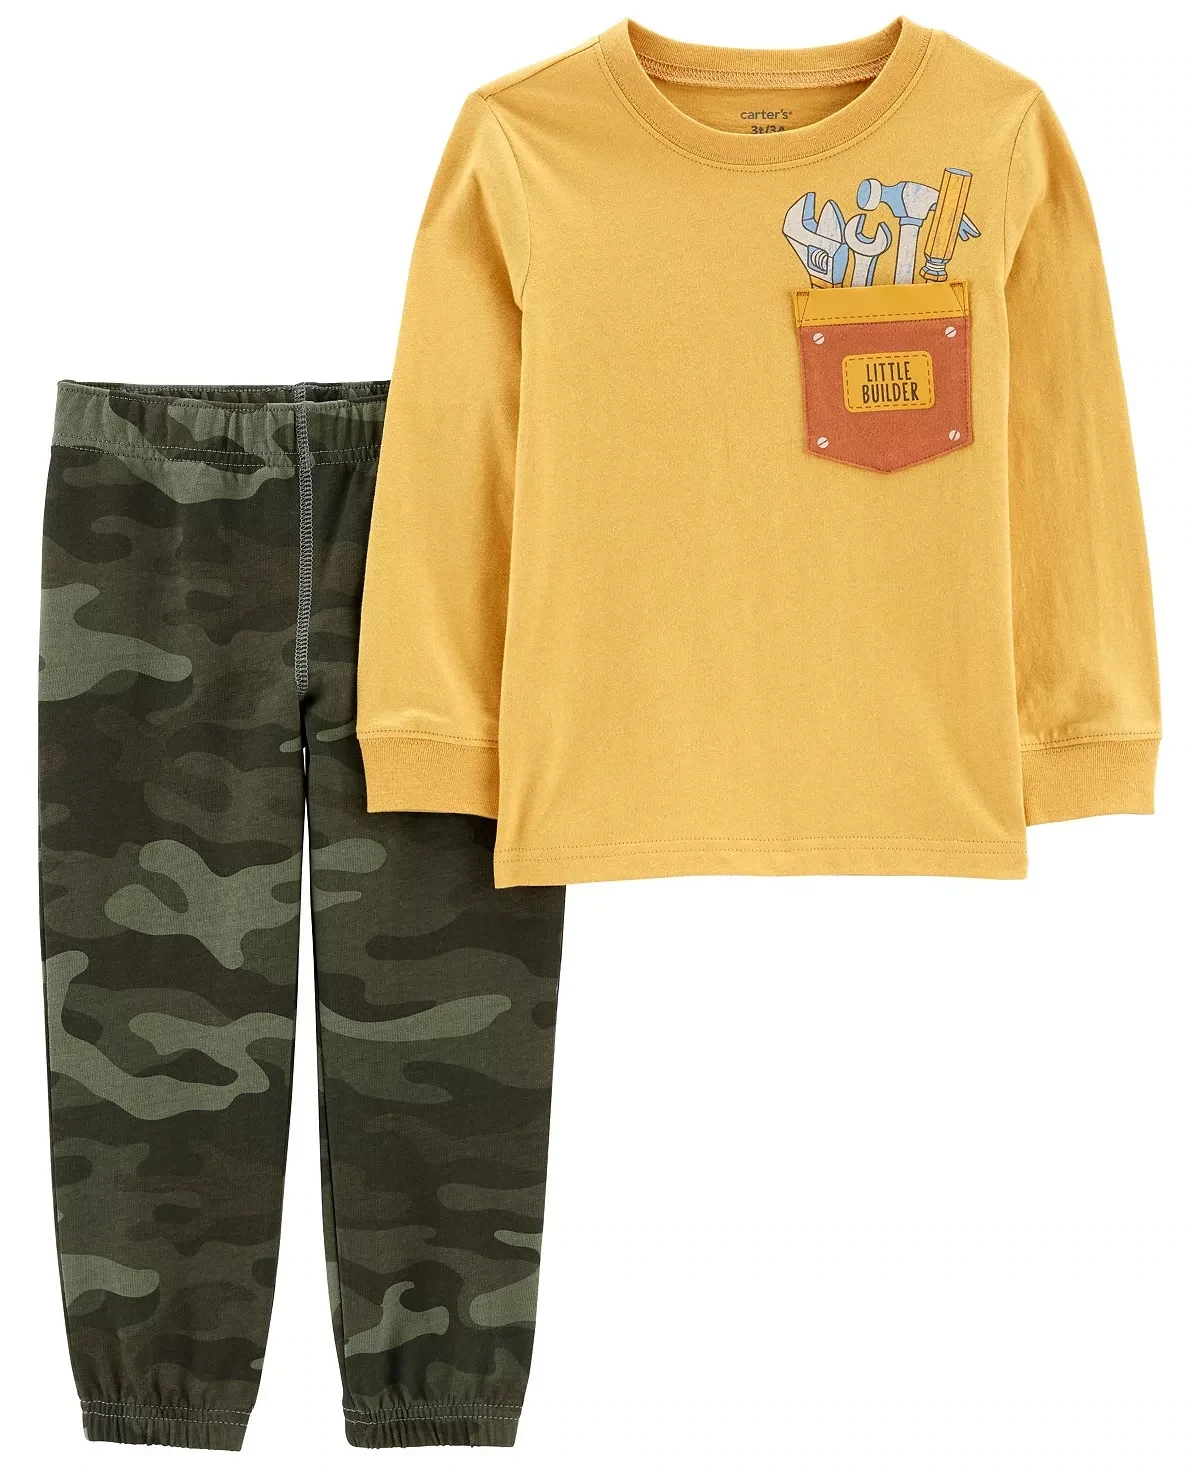 Carter's Size 9M 2-Piece Little Builder Tee & Camo Jogger Set in Yellow